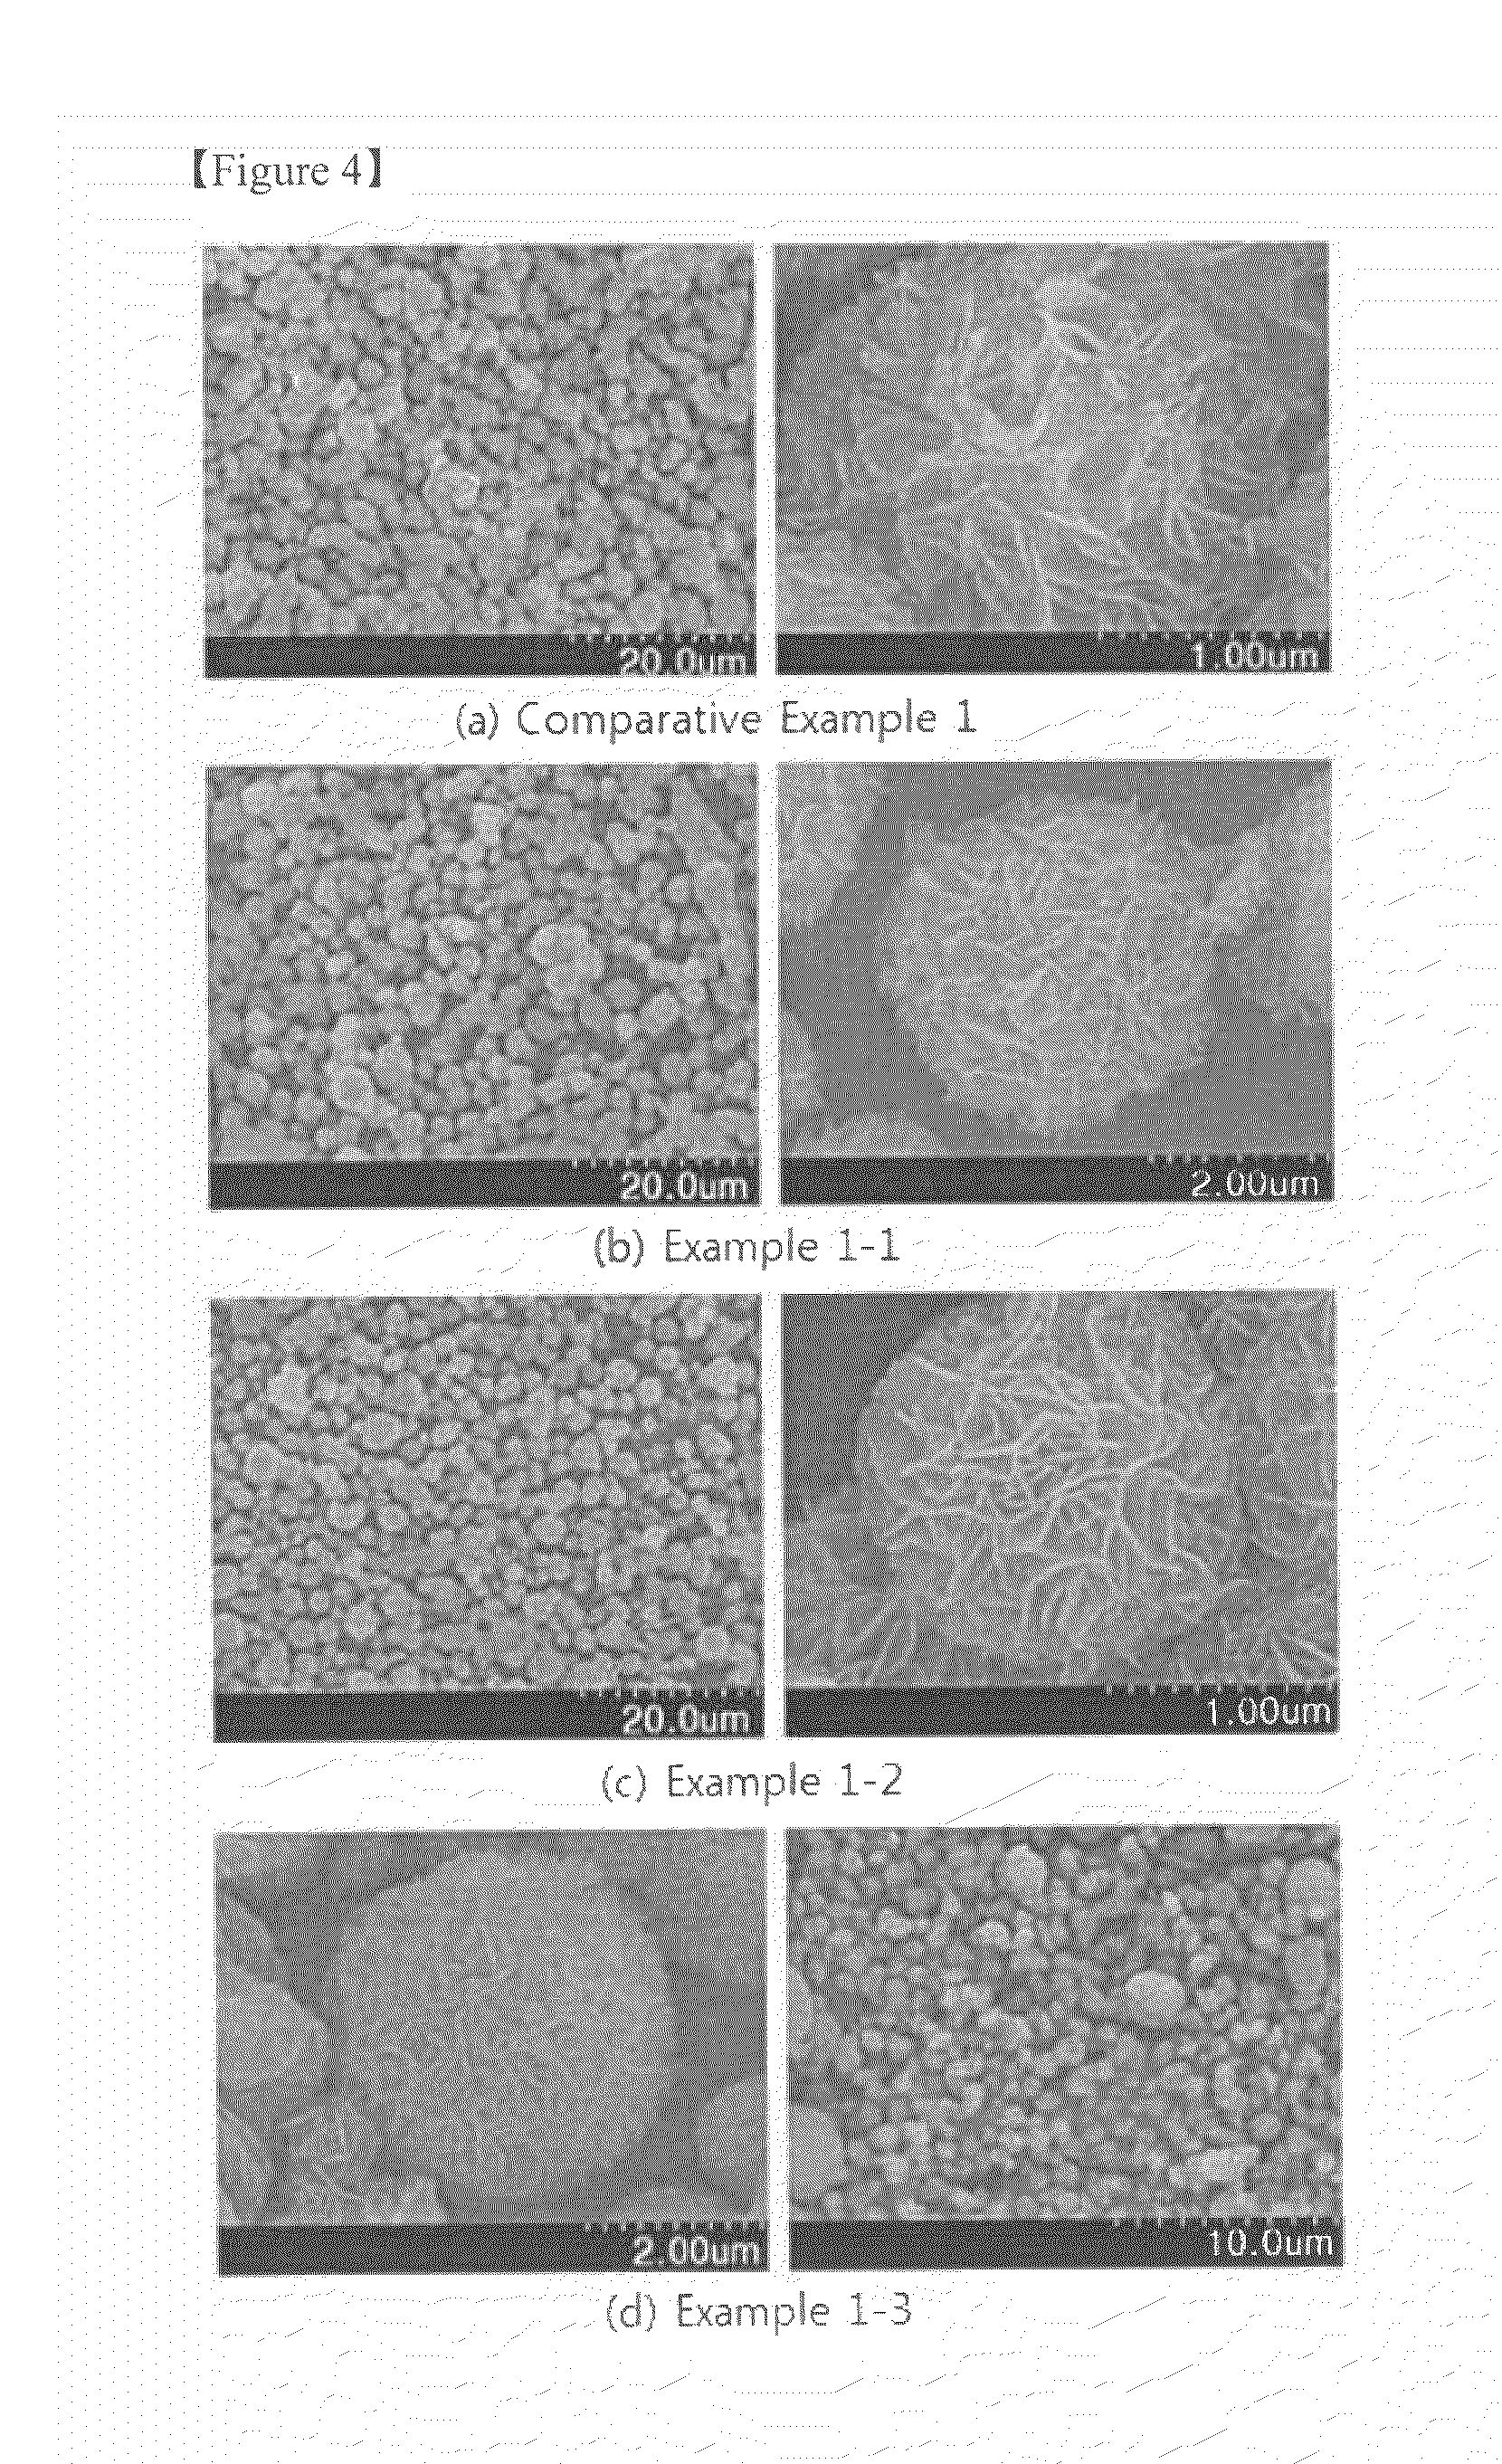 Methylbenzene gas sensor using chrome-doped nickel oxide nanostructures and method for producing same